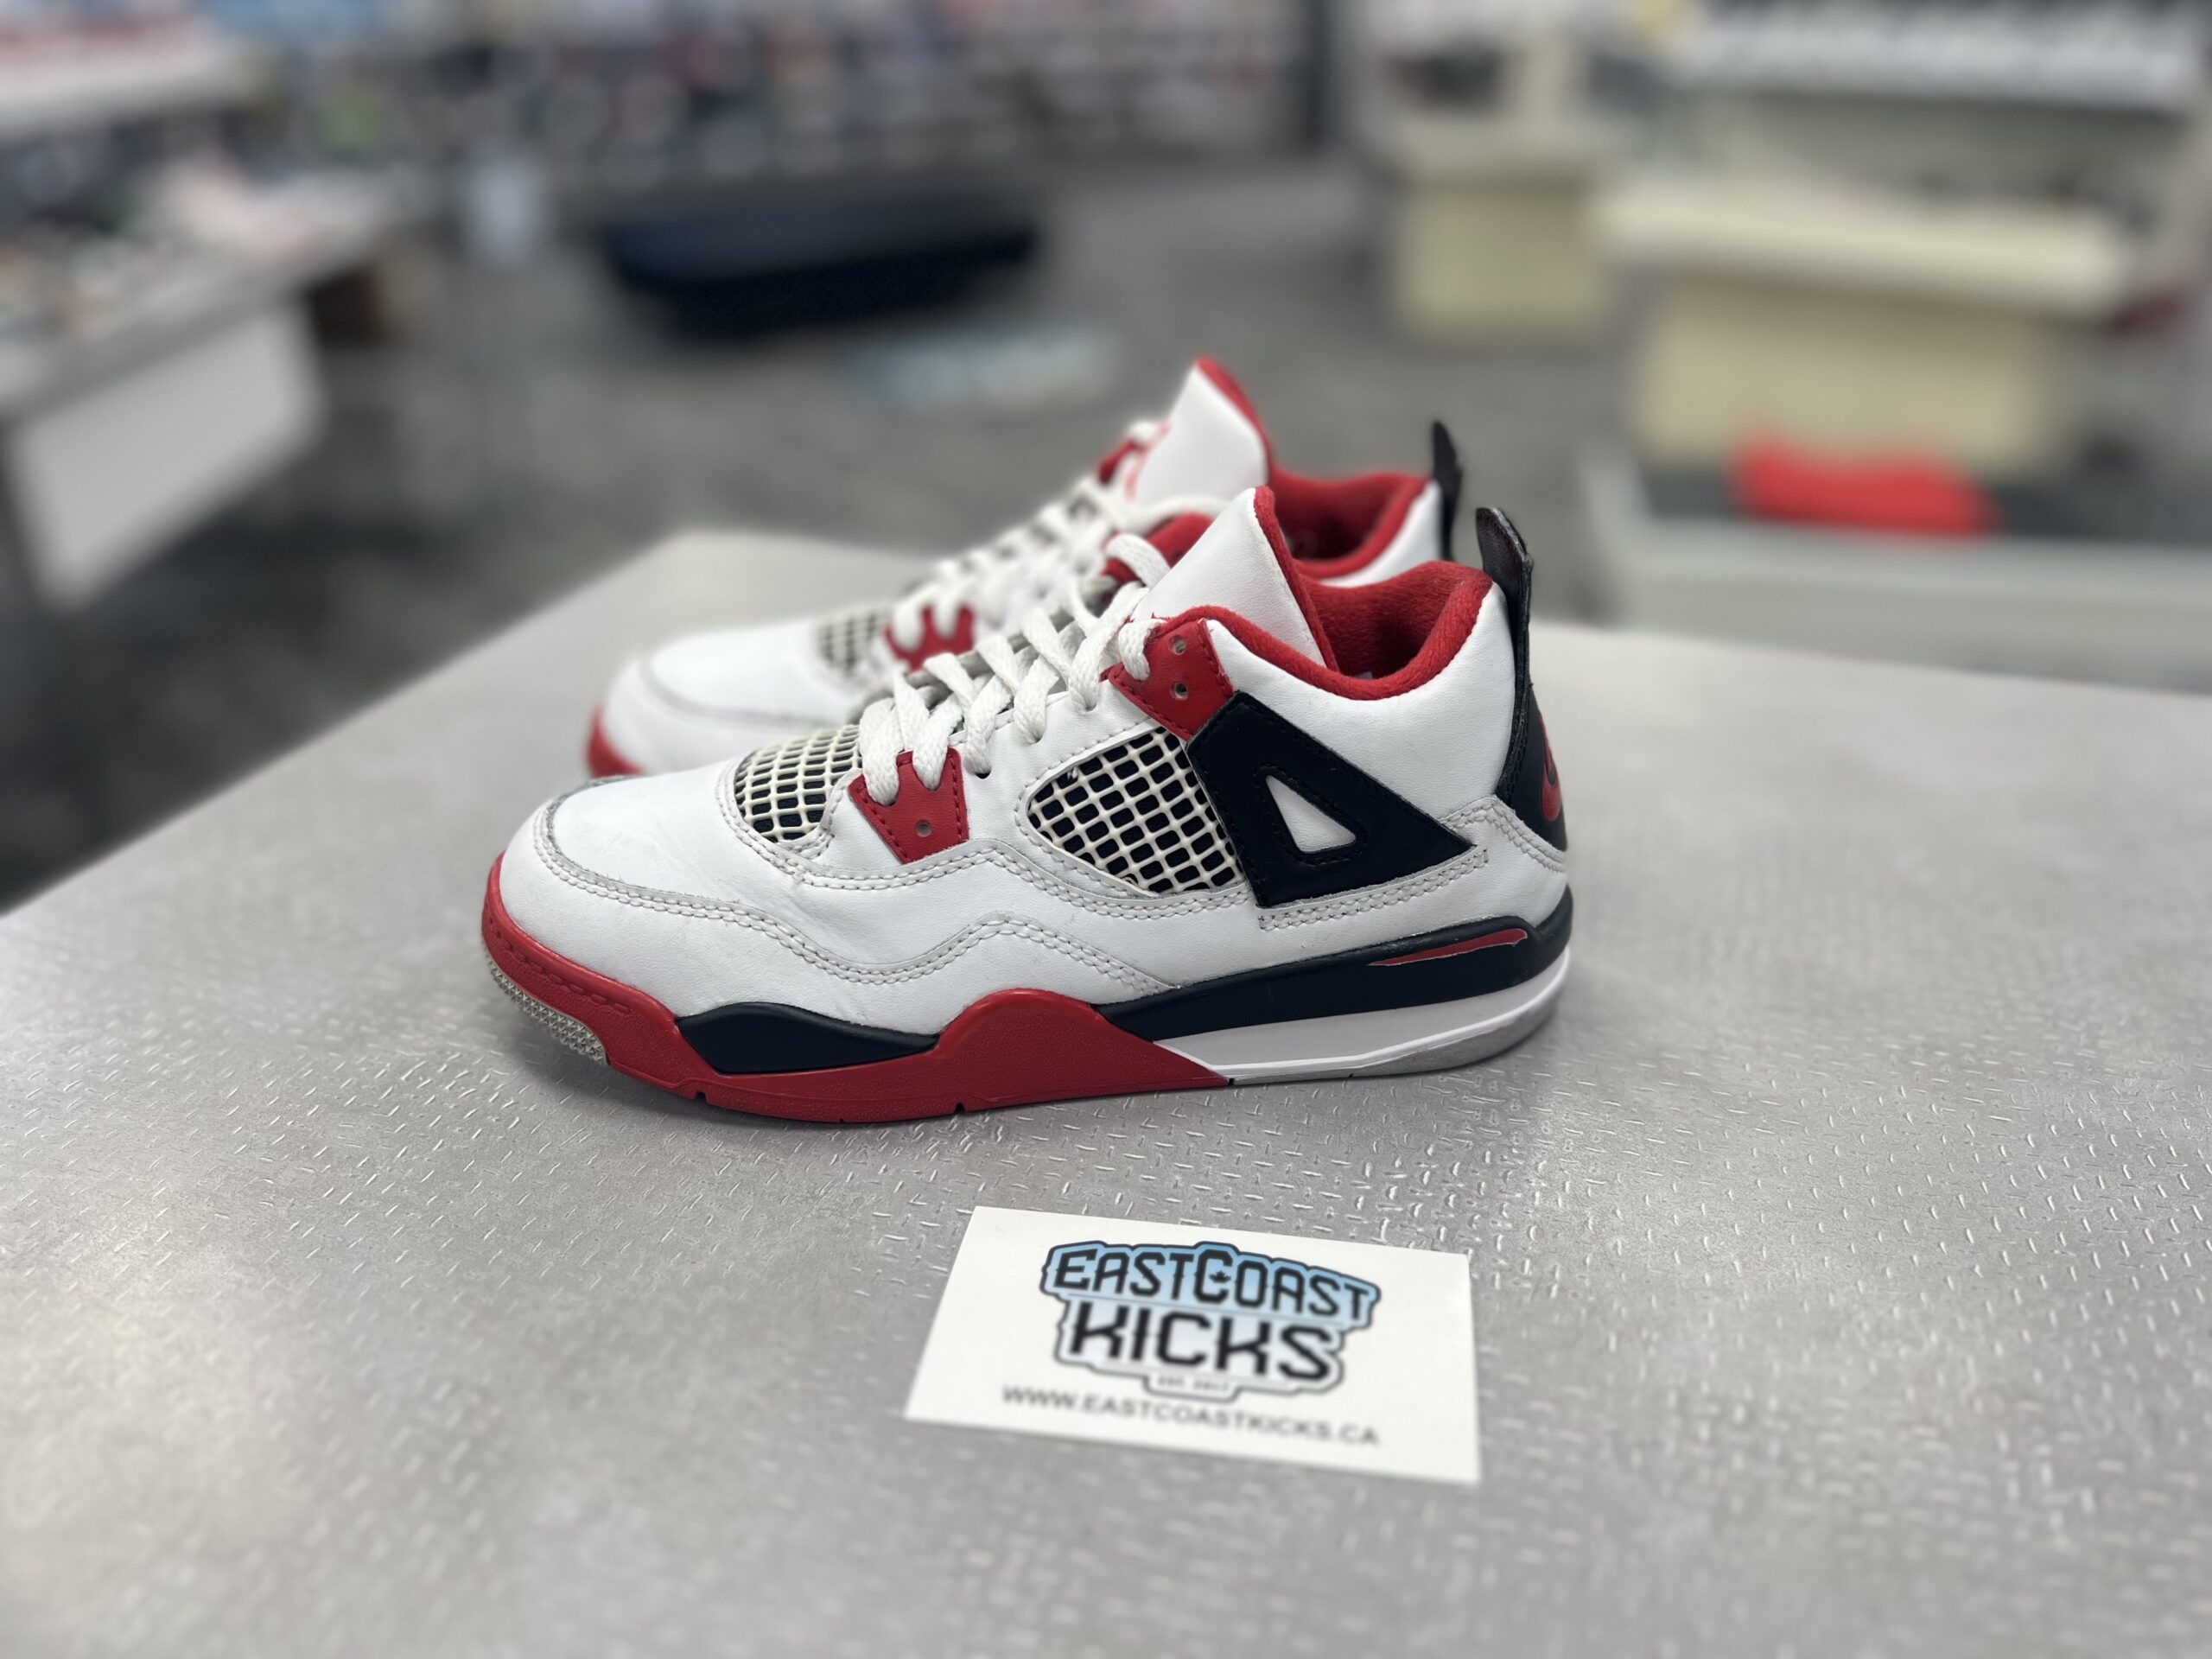 Preowned Jordan 4 Retro Fire Red Size 1Y